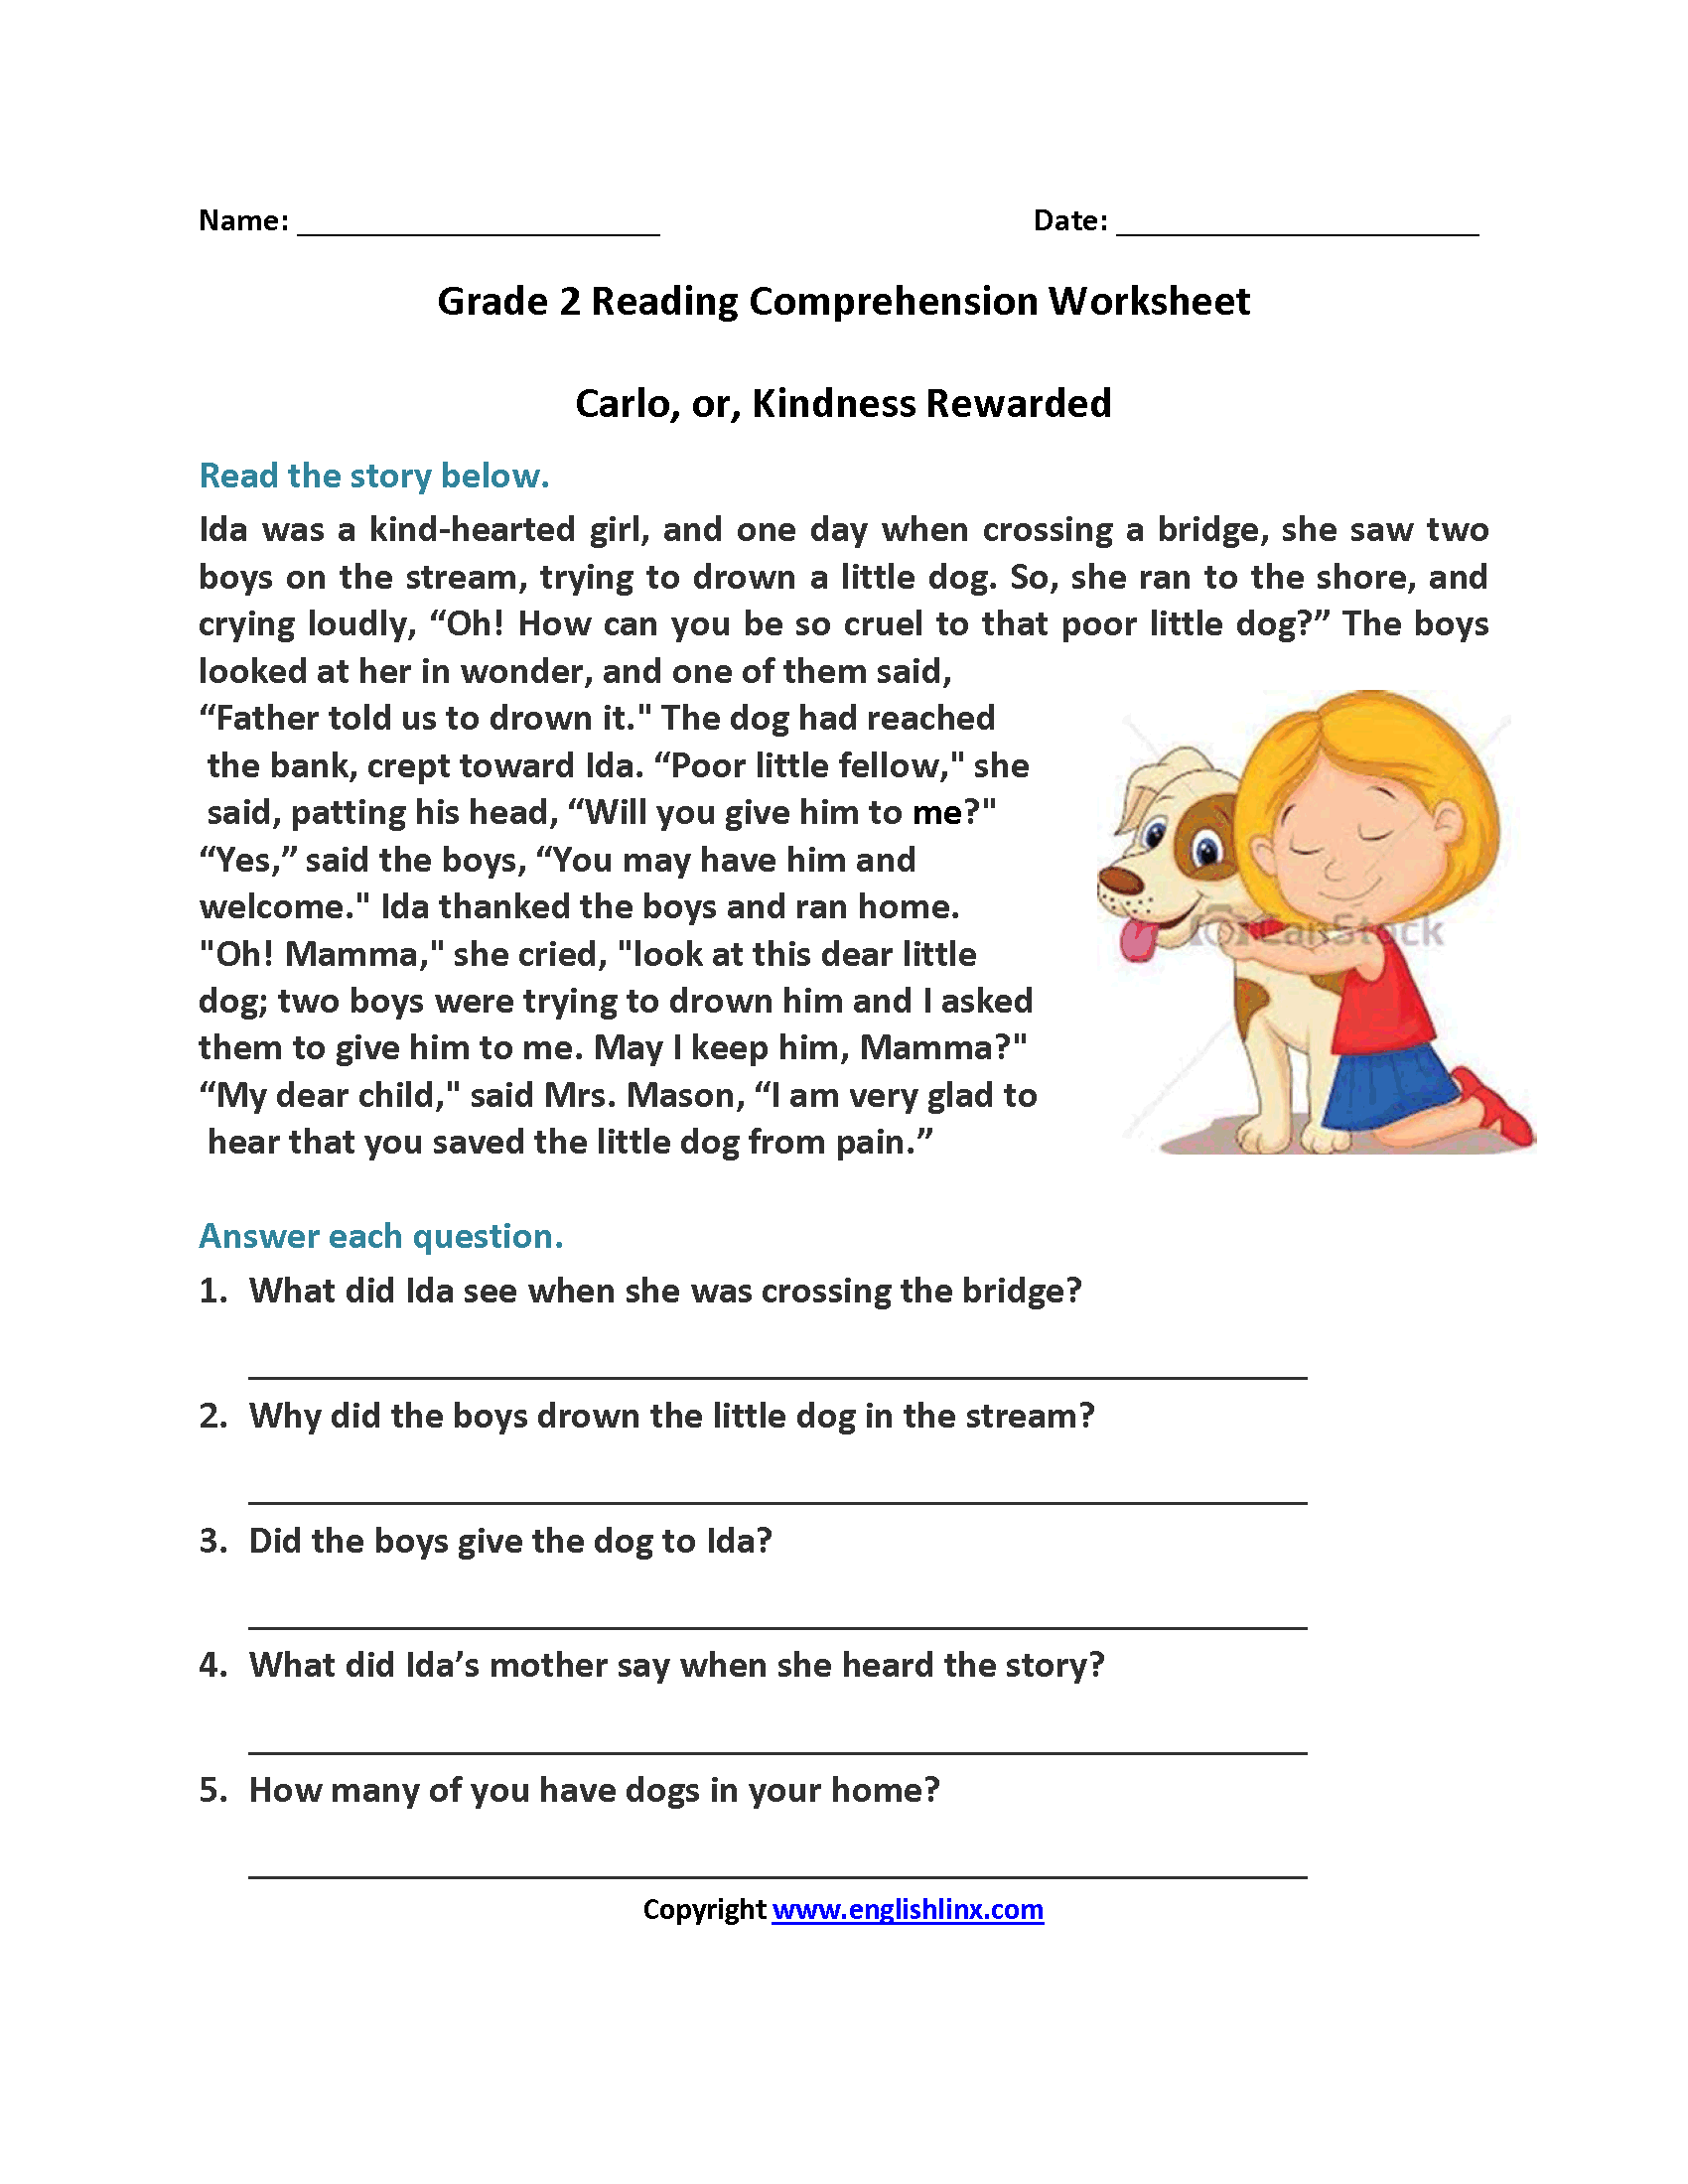 Carlo or Kindness Rewarded Second Grade Reading Worksheets